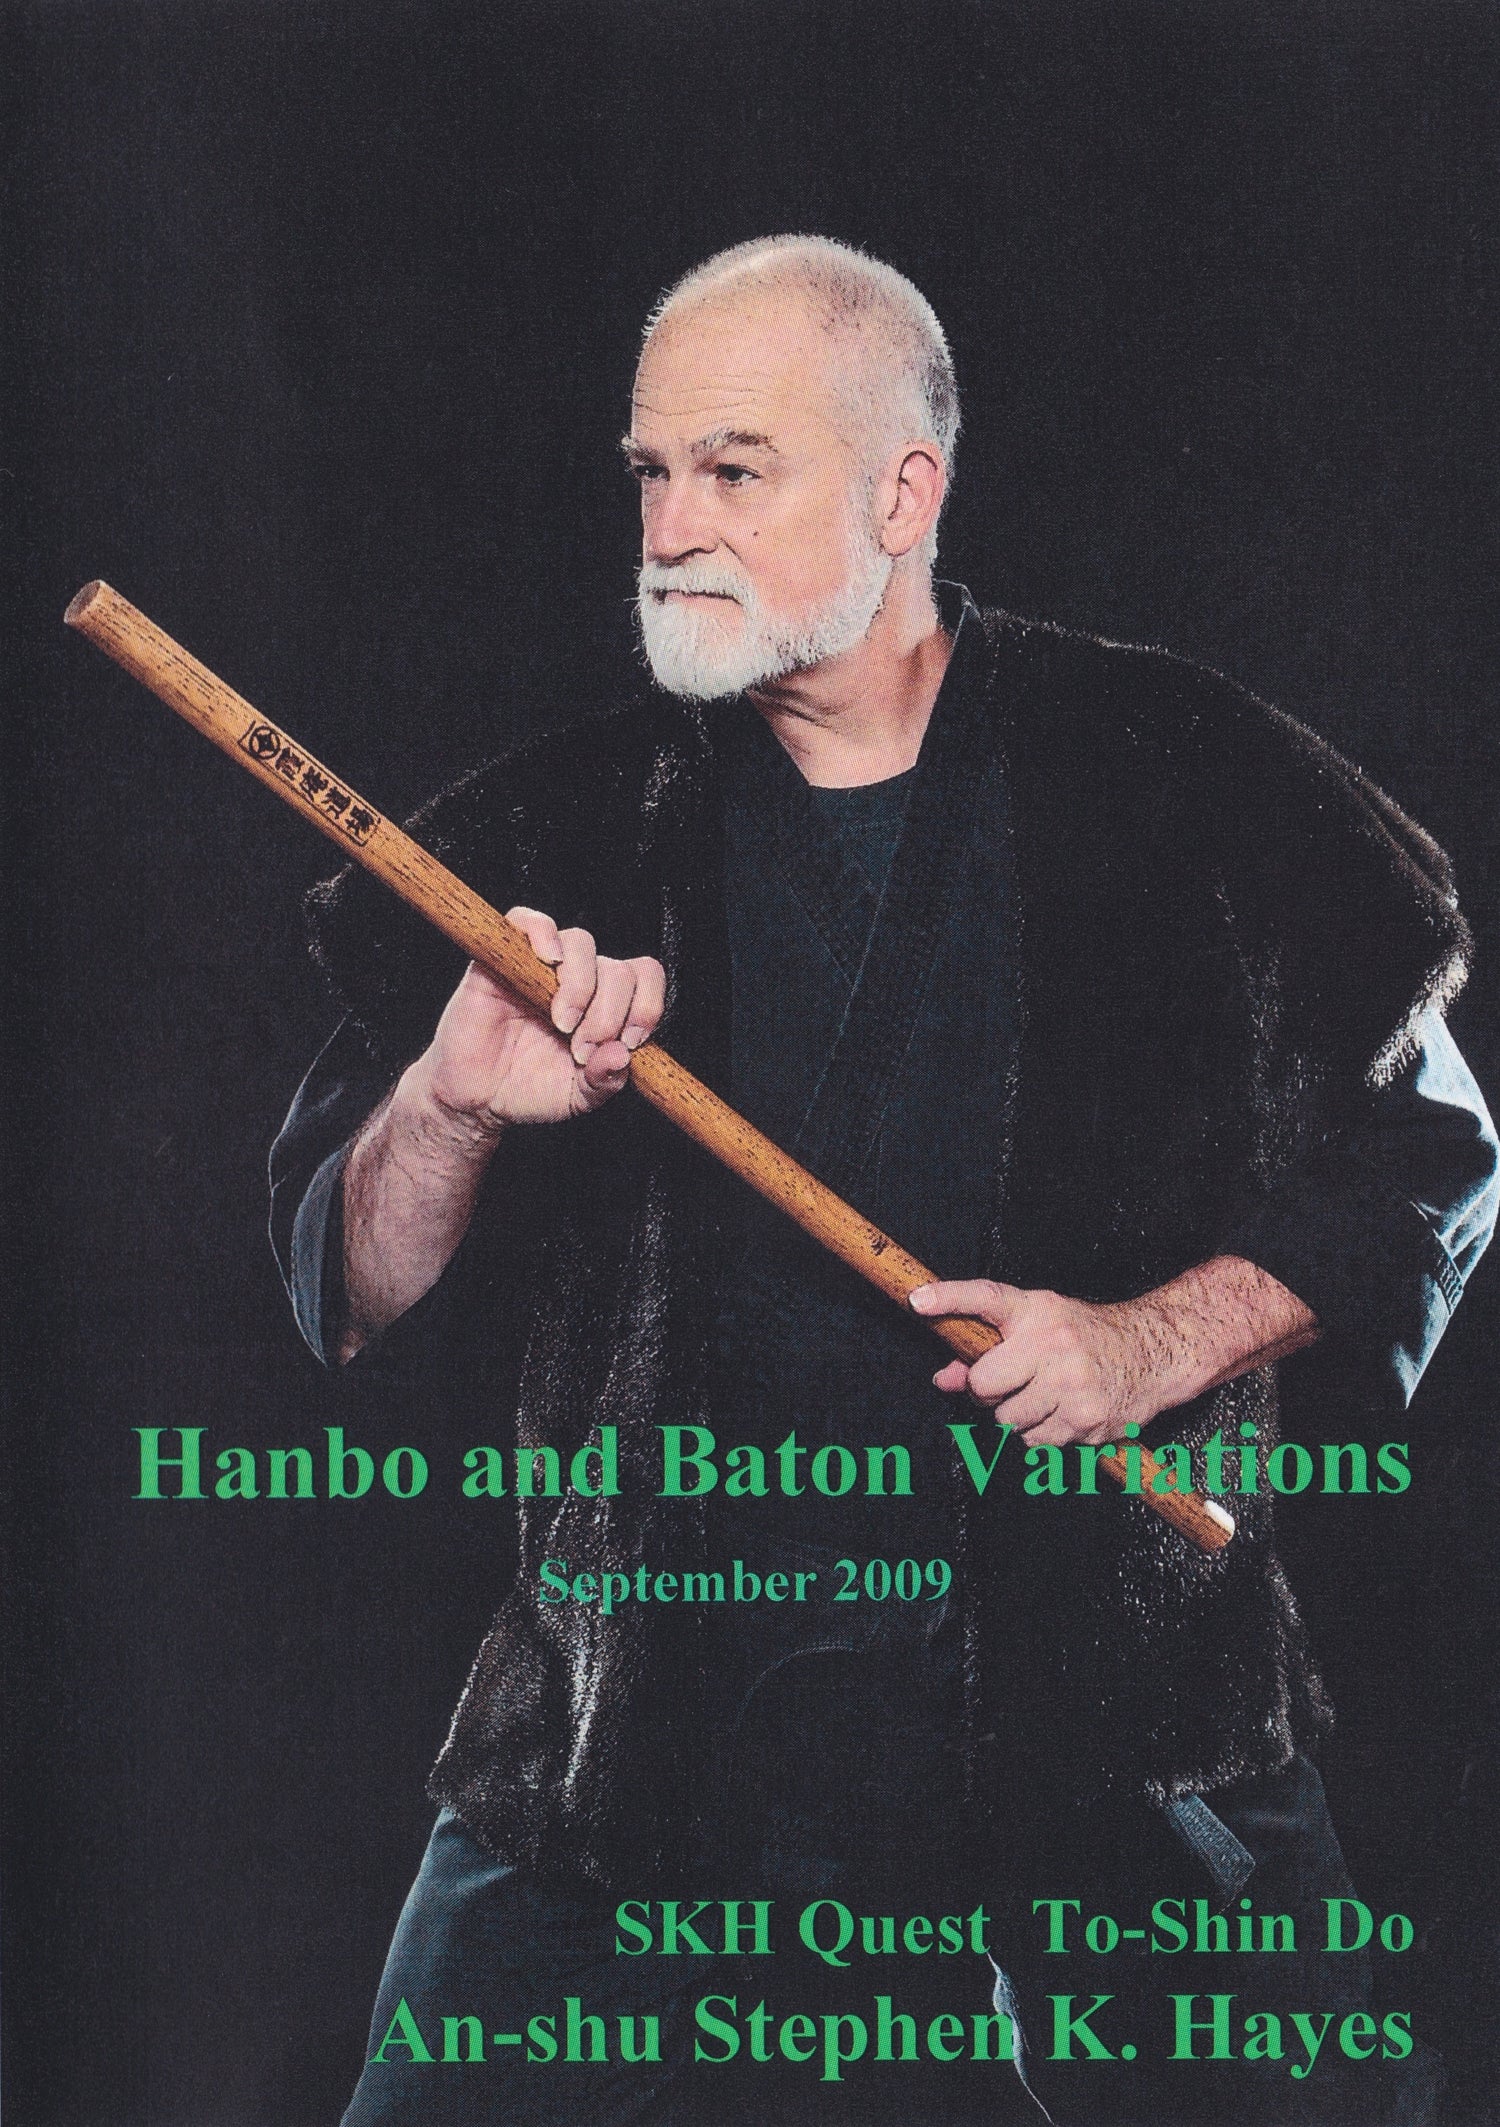 Hanbo & Baton Variations DVD by Stephen Hayes